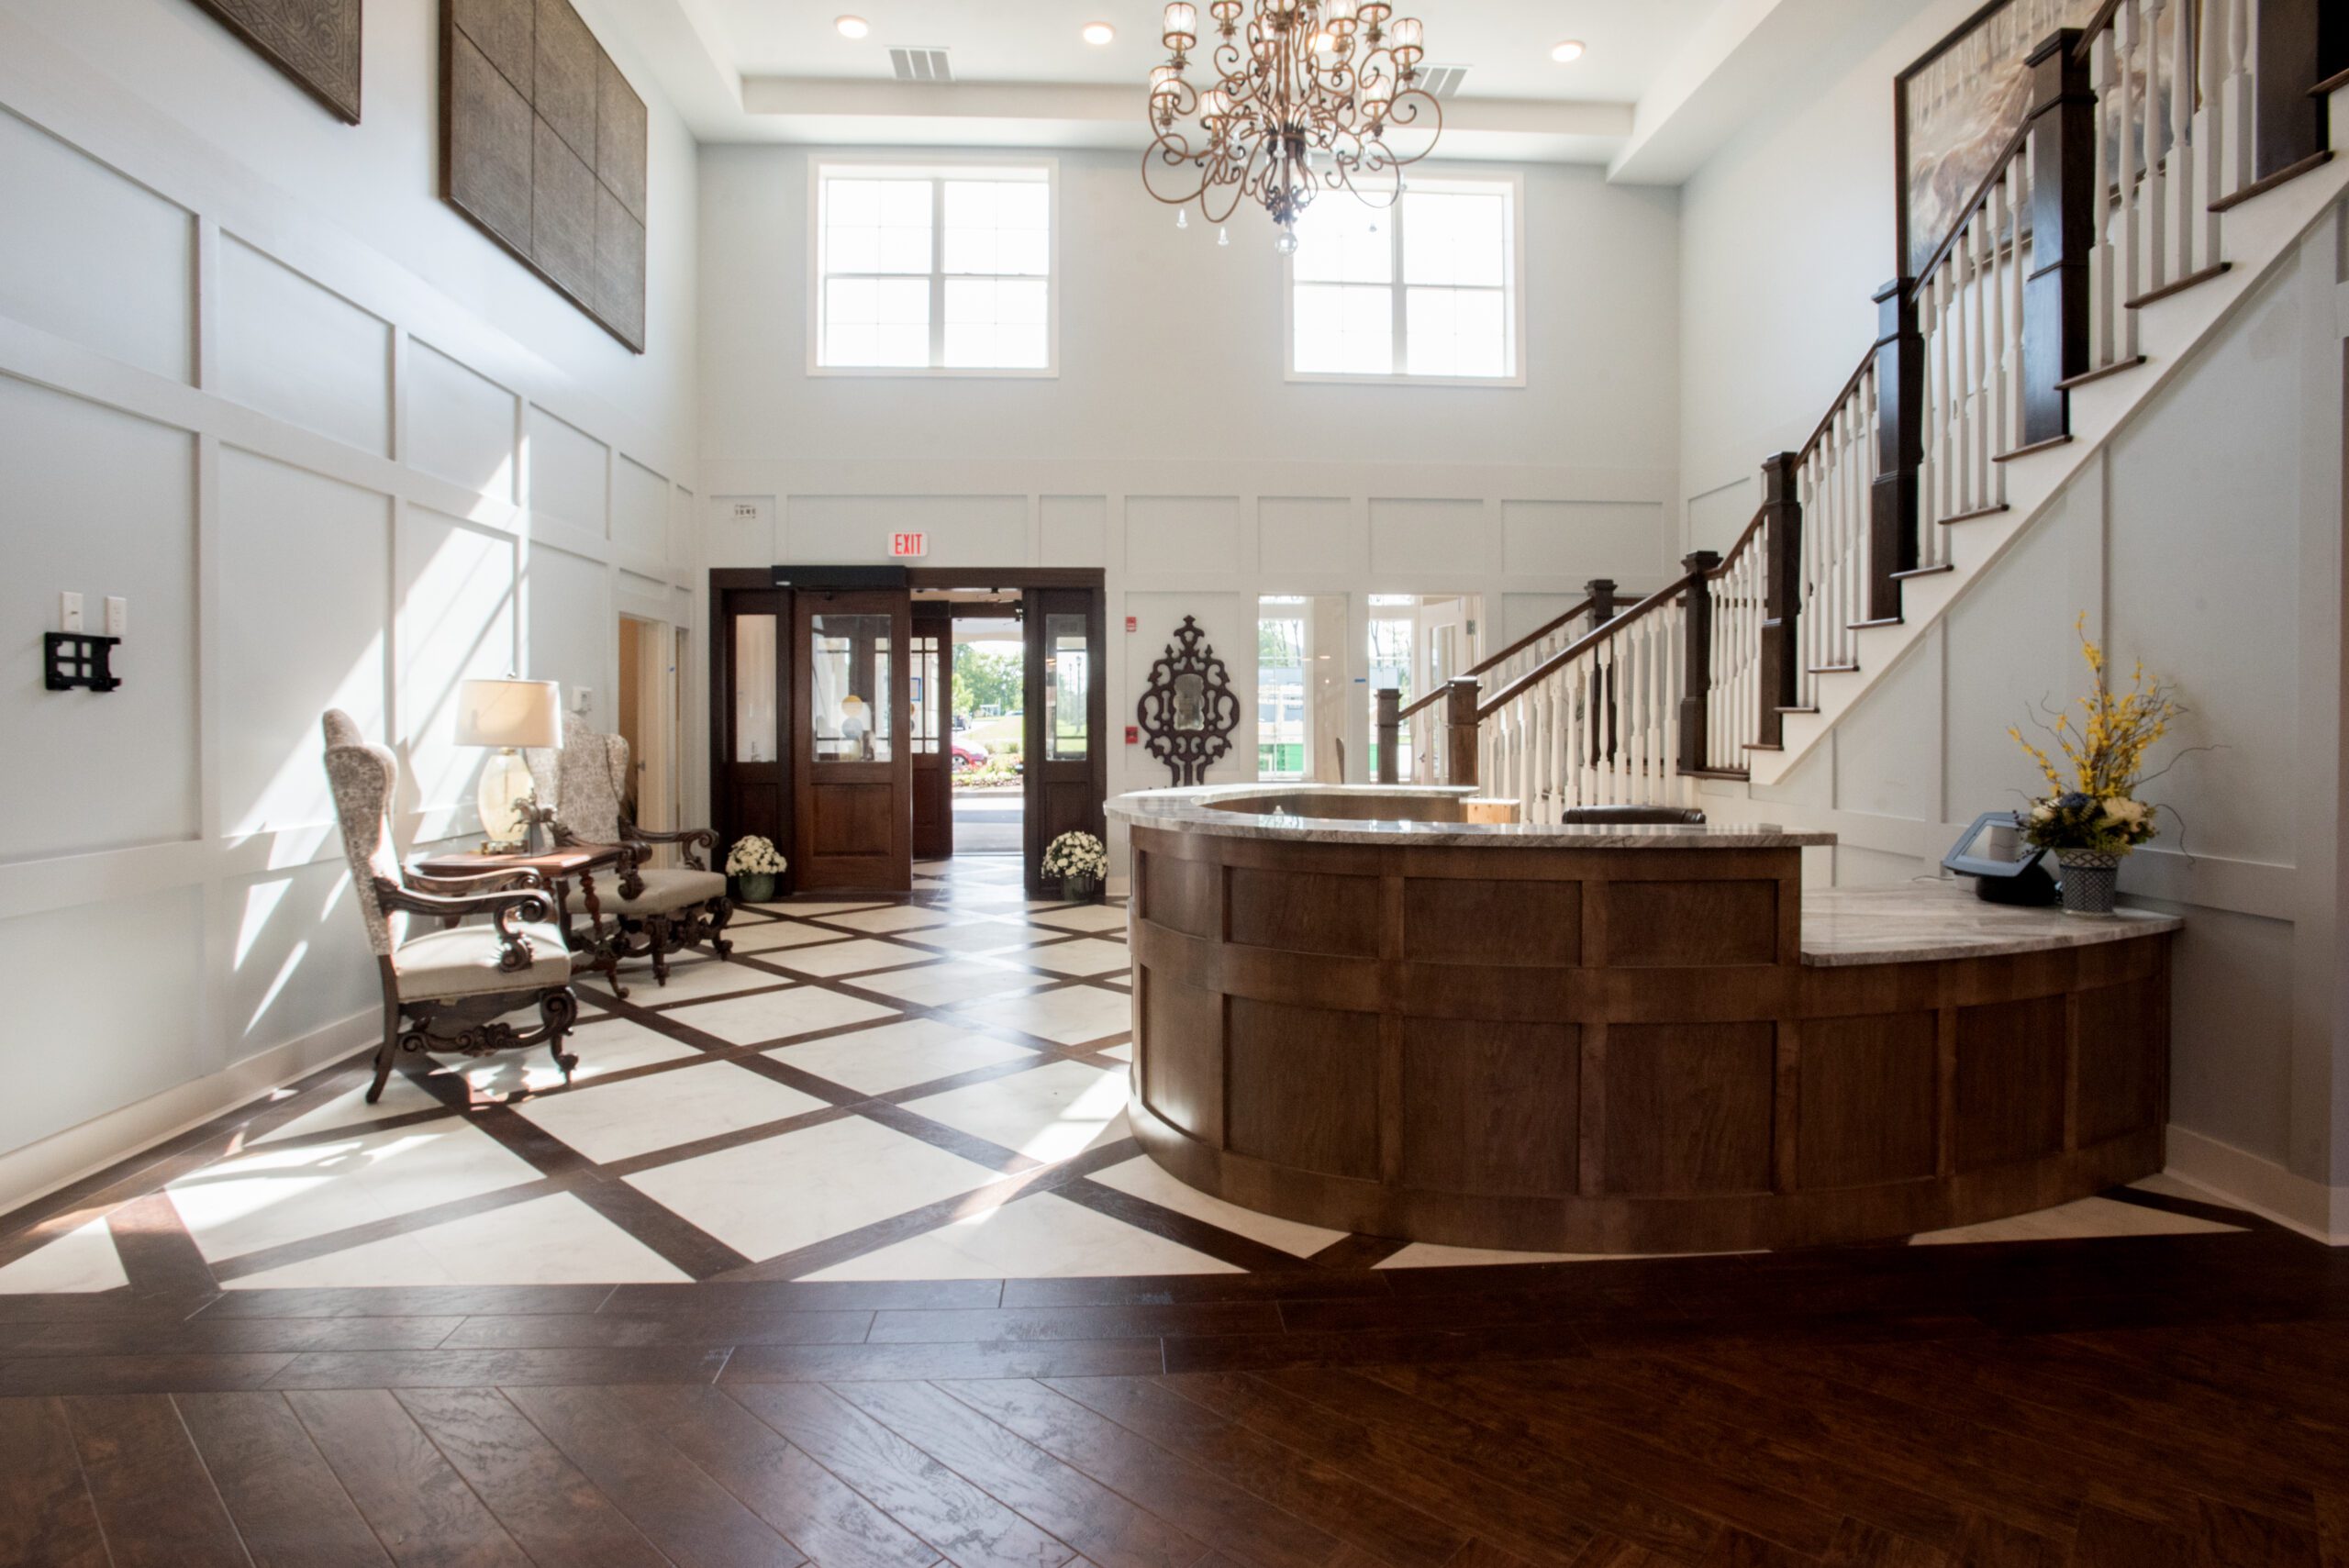 The Grand Entrance and Reception Area